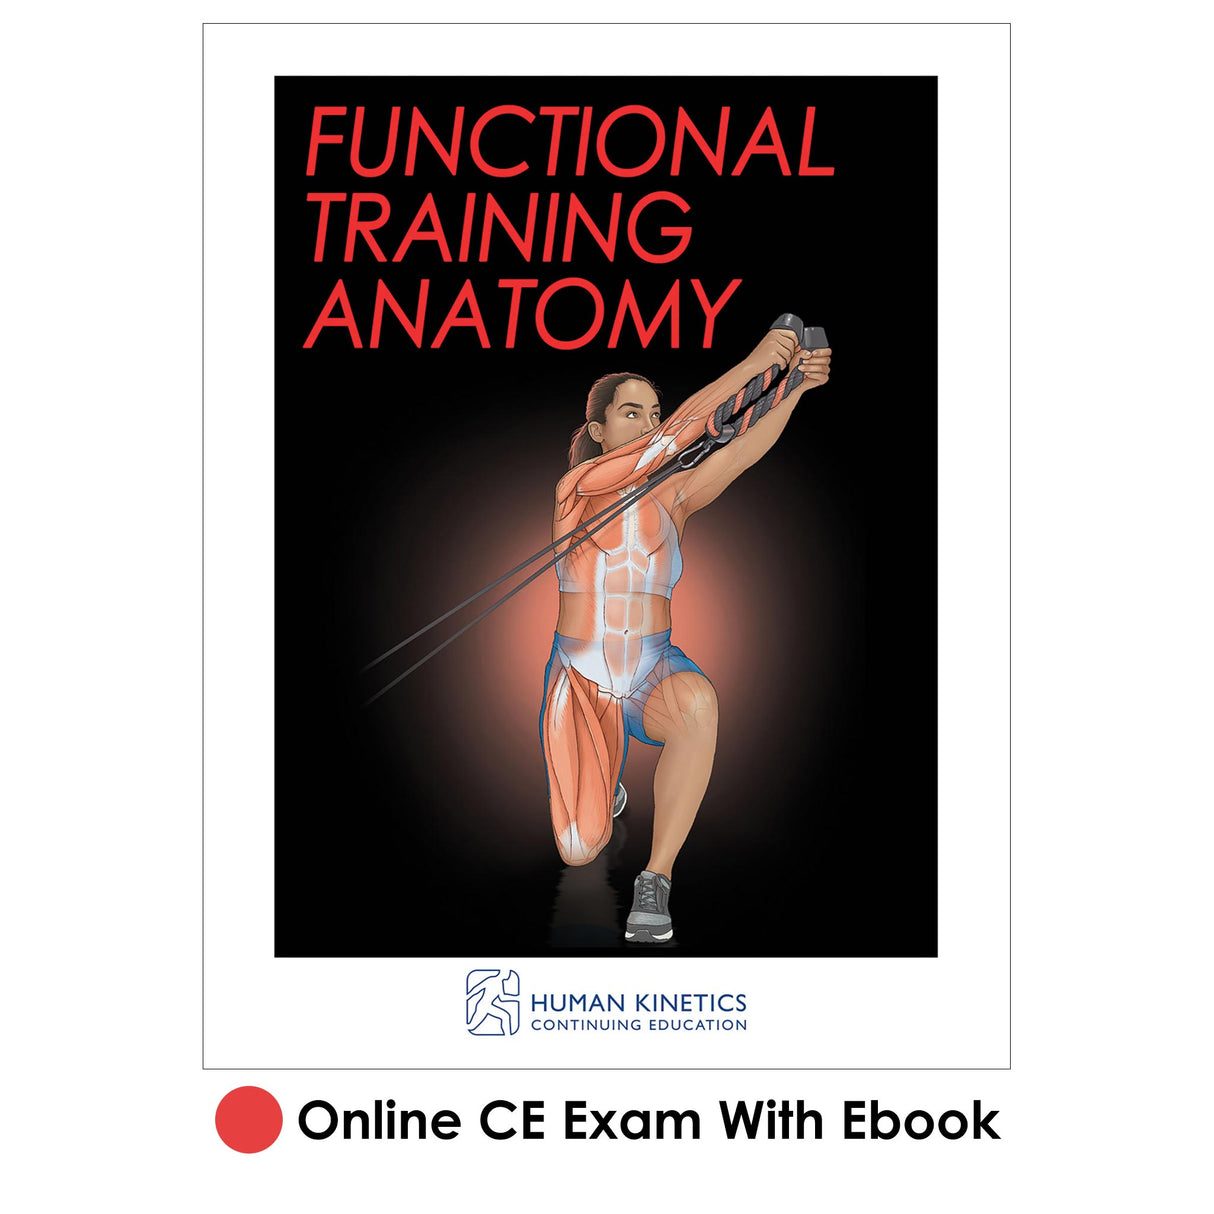 Functional Training Anatomy Online CE Exam With Ebook